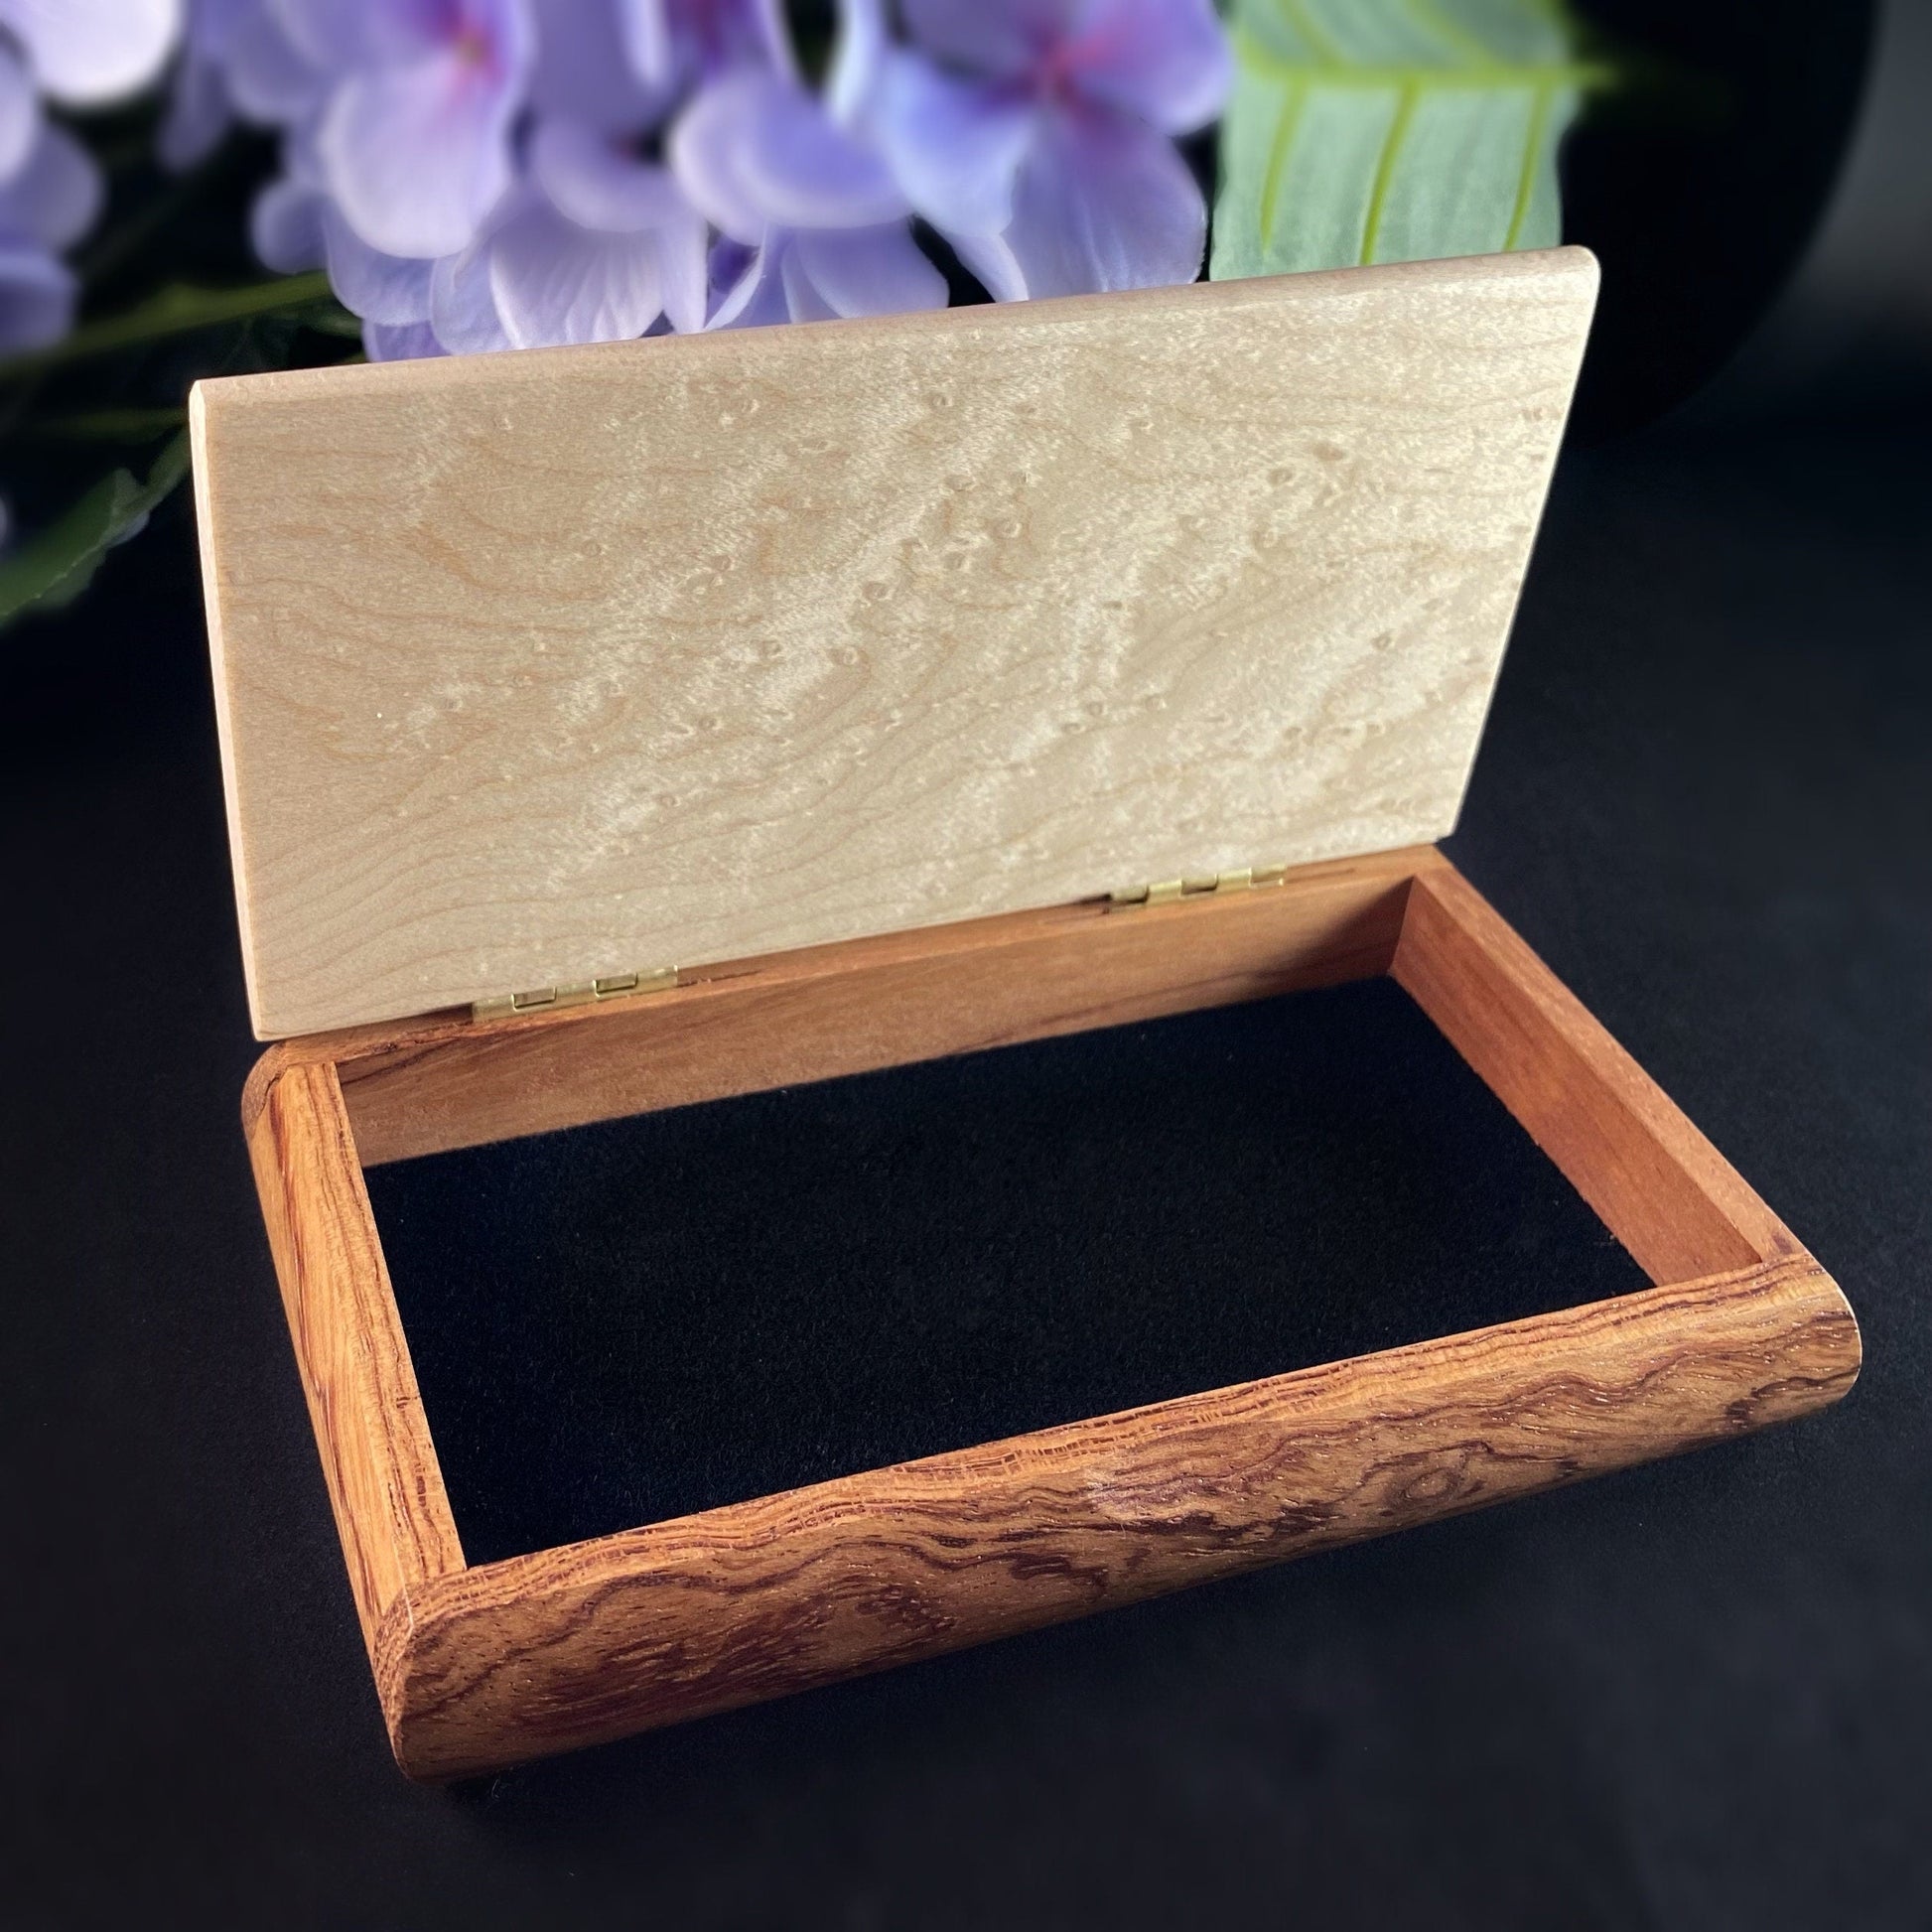 Golf is a Good Walk Spoiled Quote Box, Handmade Wooden Box with Birdseye Maple and Bubinga, made in USA